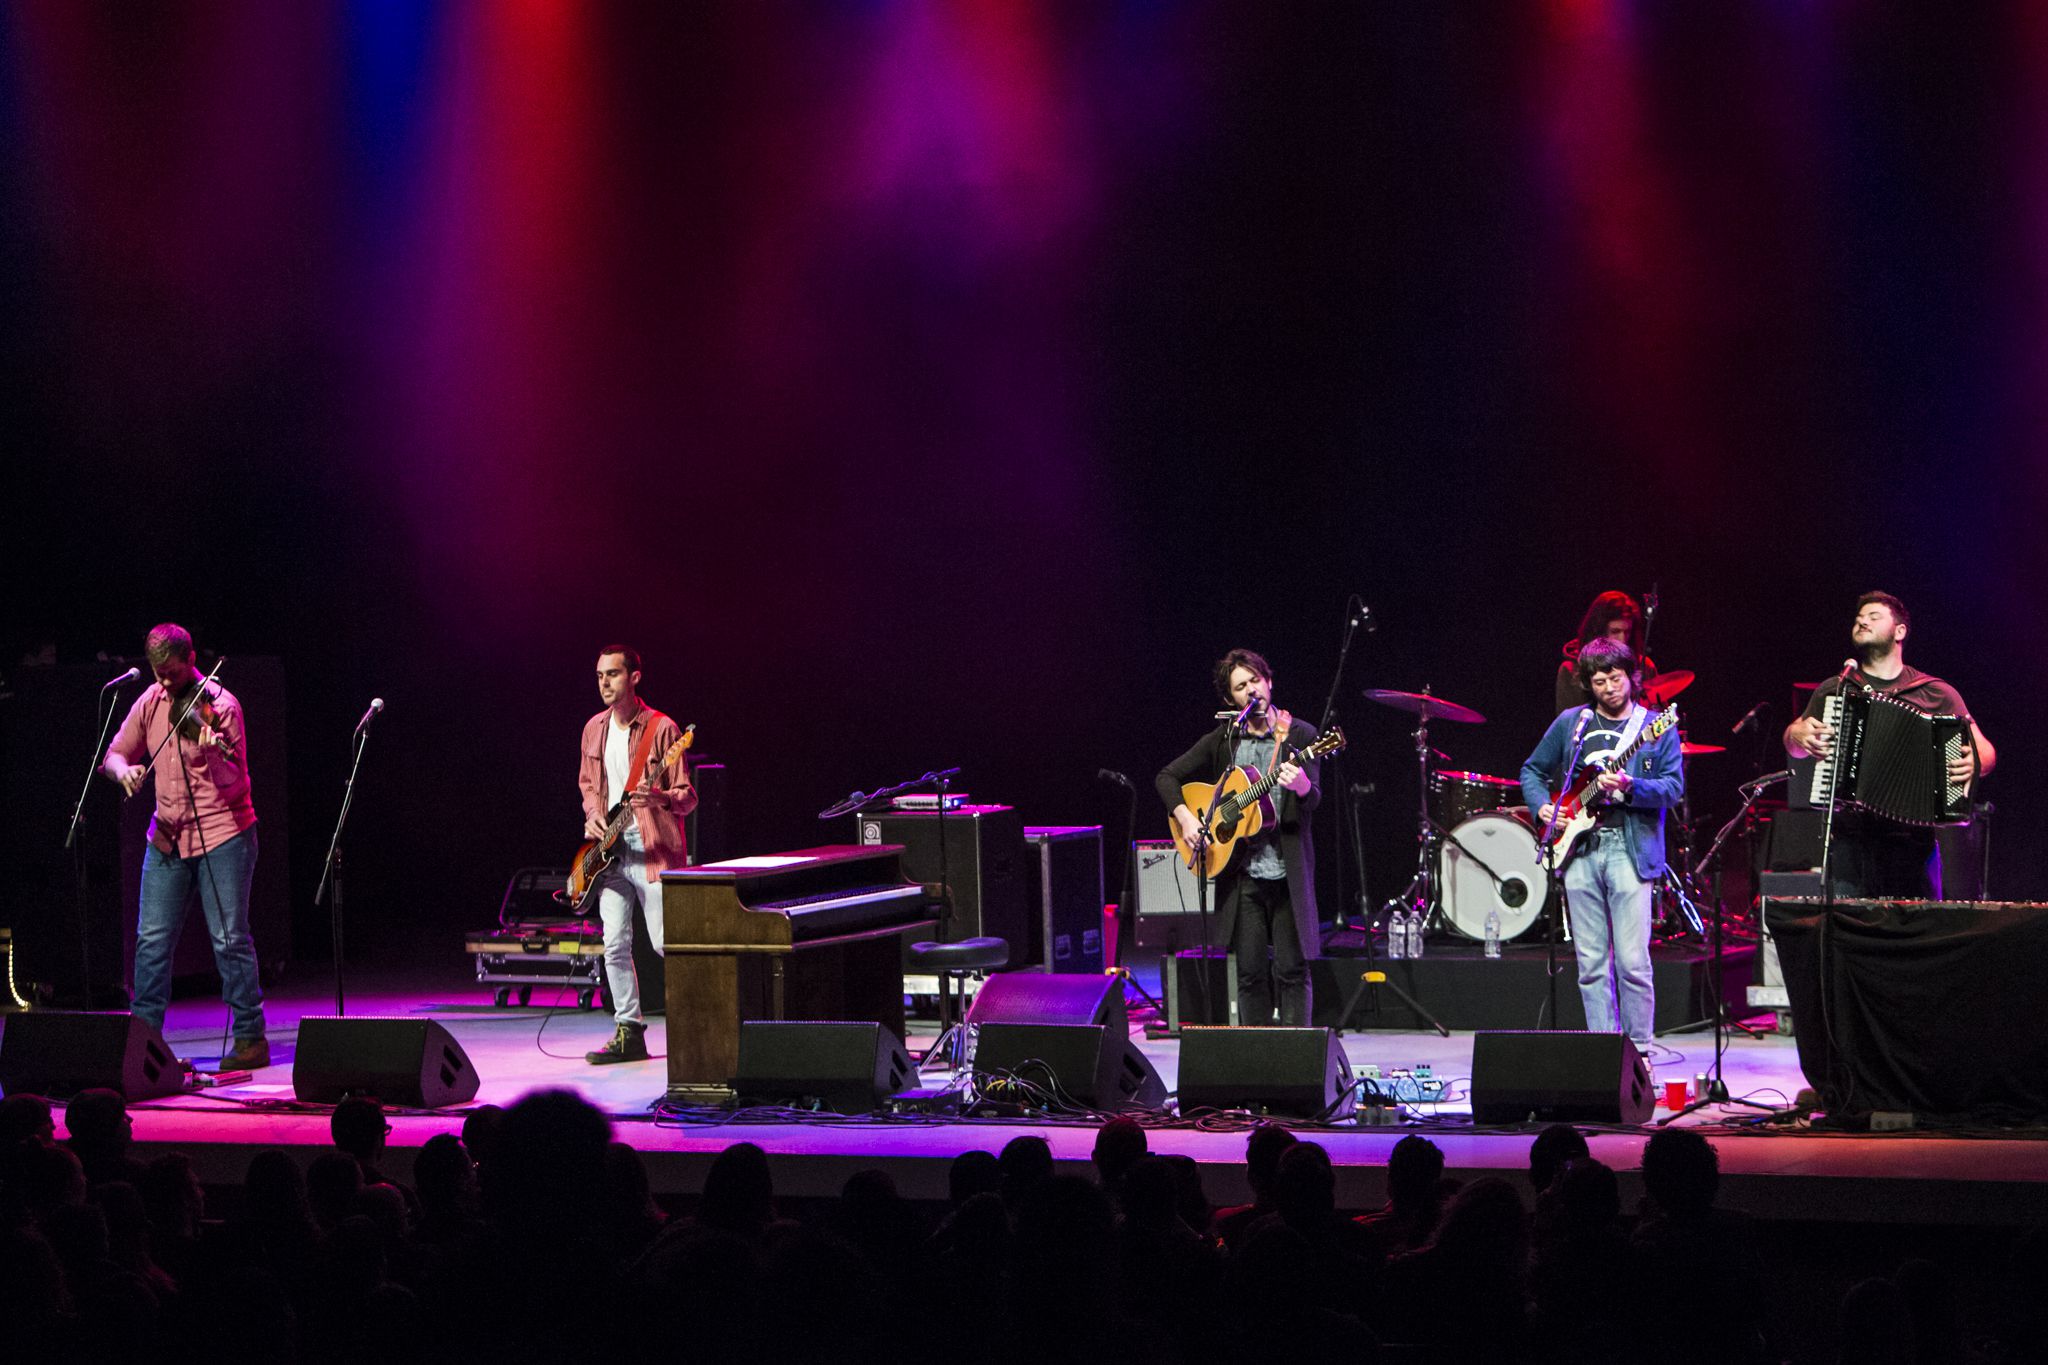 conor oberst 1 Live Review: Conor Oberst at LAs Greek Theatre (5/13)